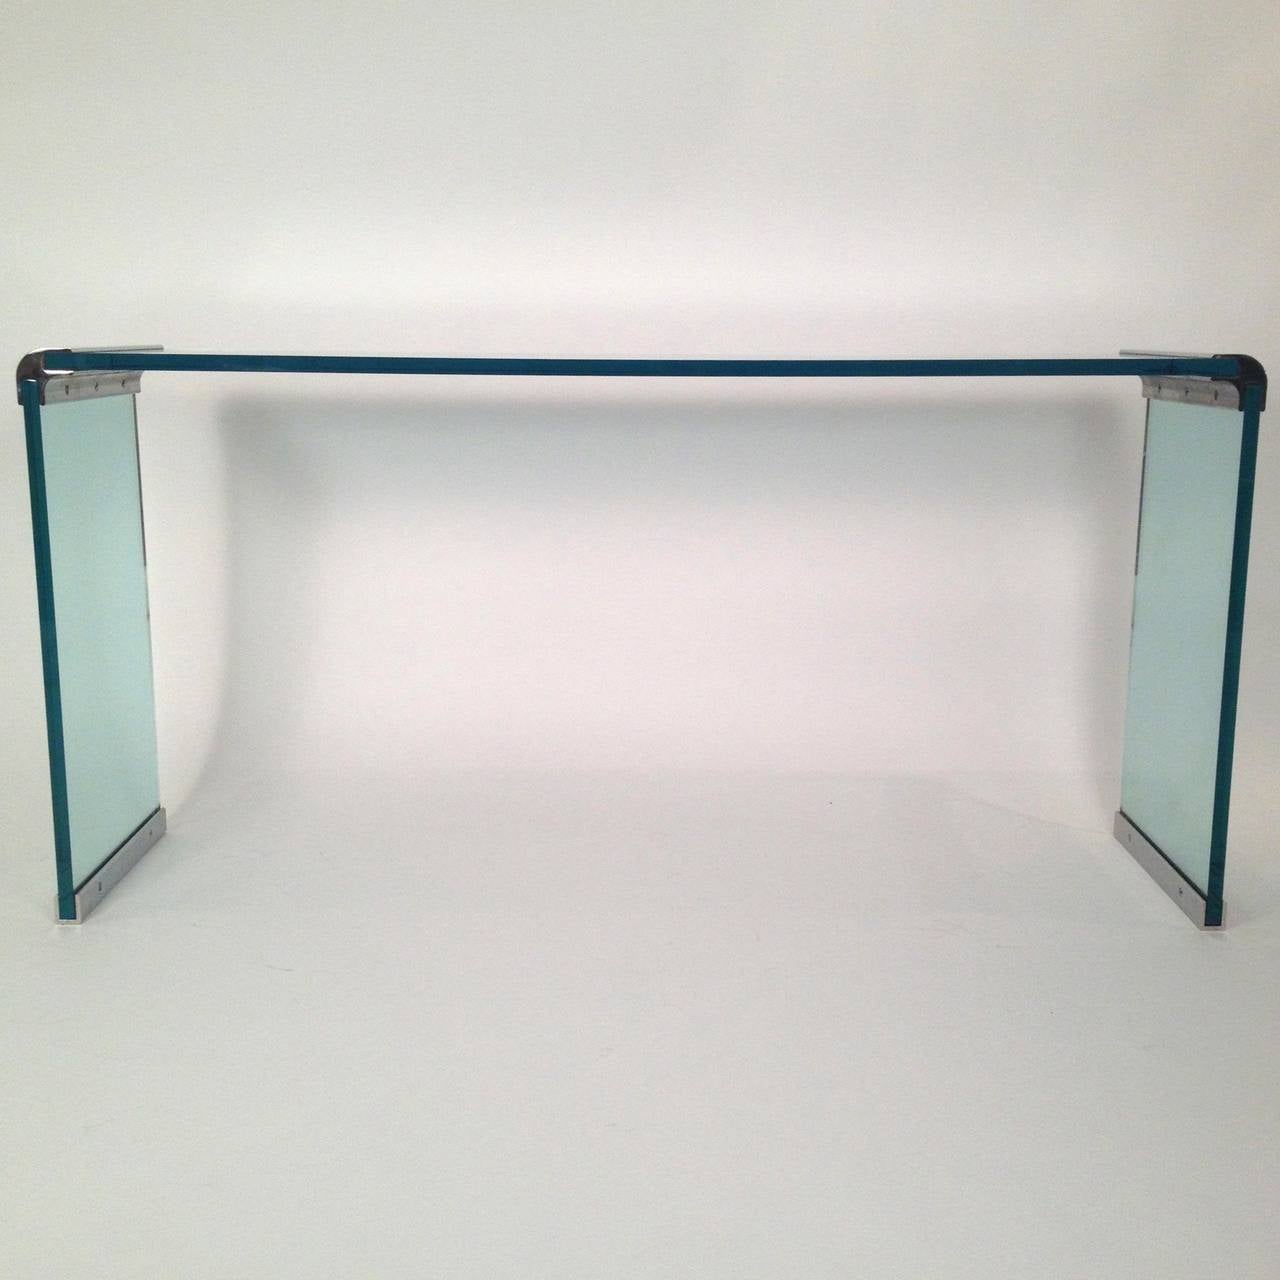 Offered is a sleek and modern console table in glass and chrome with the simple yet elegant look that is a Pace design signature.  The console offered is rare in that it has the chrome joints at the top and the chrome bases at the bottom.